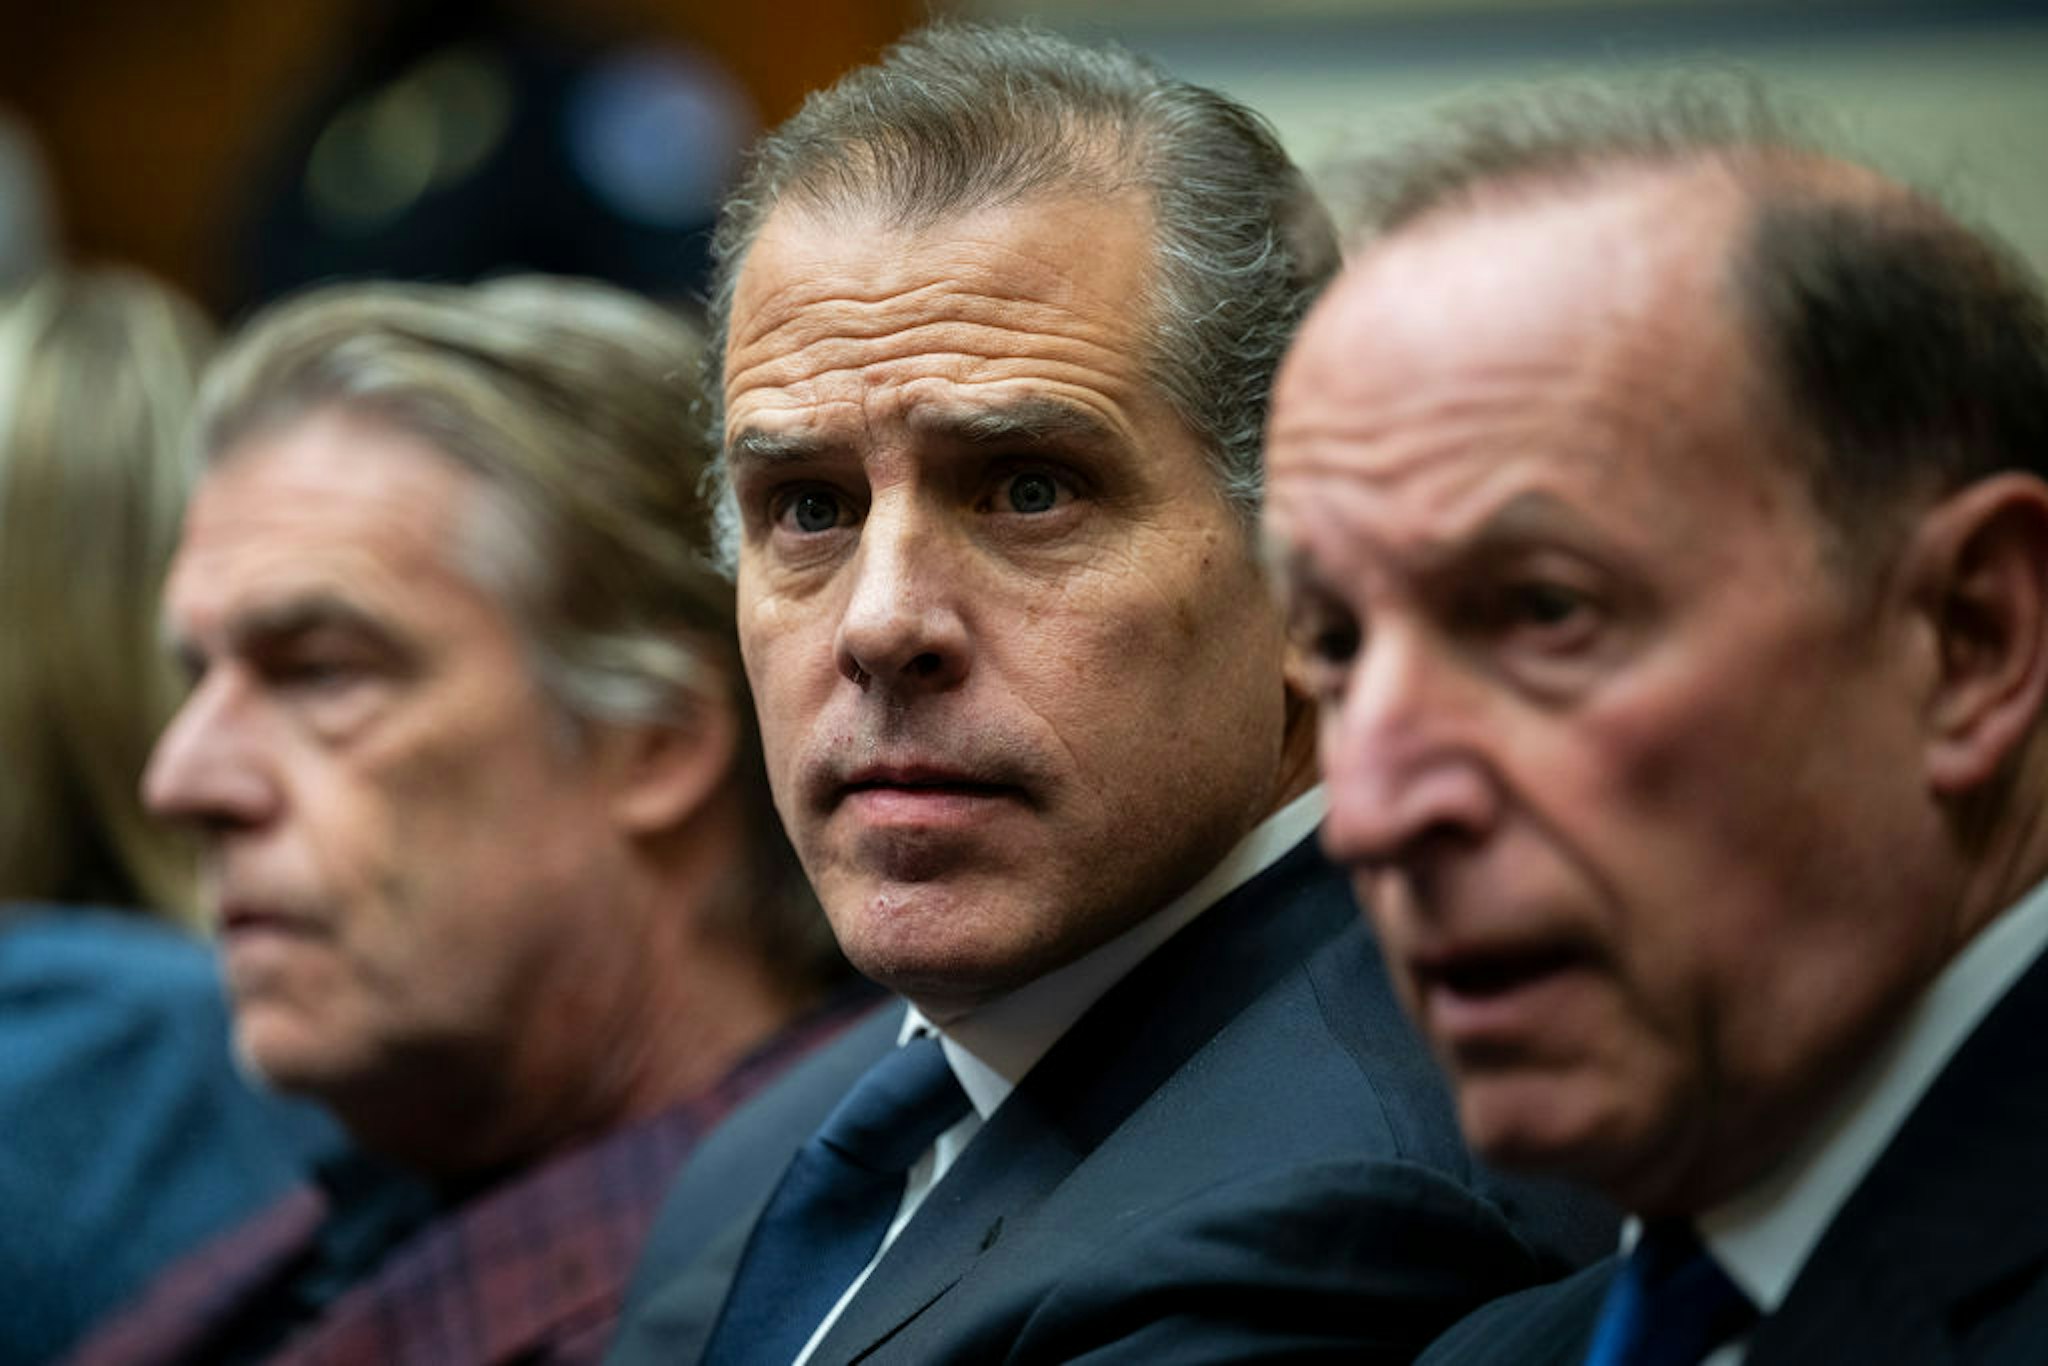 Hunter Biden, son of US President Joe Biden, center, with attorneys Kevin Morris, left, and Abbe Lowell, right, during a House Oversight Committee markup on Capitol Hill in Washington, DC, US, on Wednesday, Jan. 10, 2024. The House Judiciary and Oversight committees are expected to recommend that the president's son be held in criminal contempt of Congress for refusing to comply with a subpoena in the ongoing impeachment inquiry into his father, President Joe Biden. Photographer: Graeme Sloan/Bloomberg via Getty Images